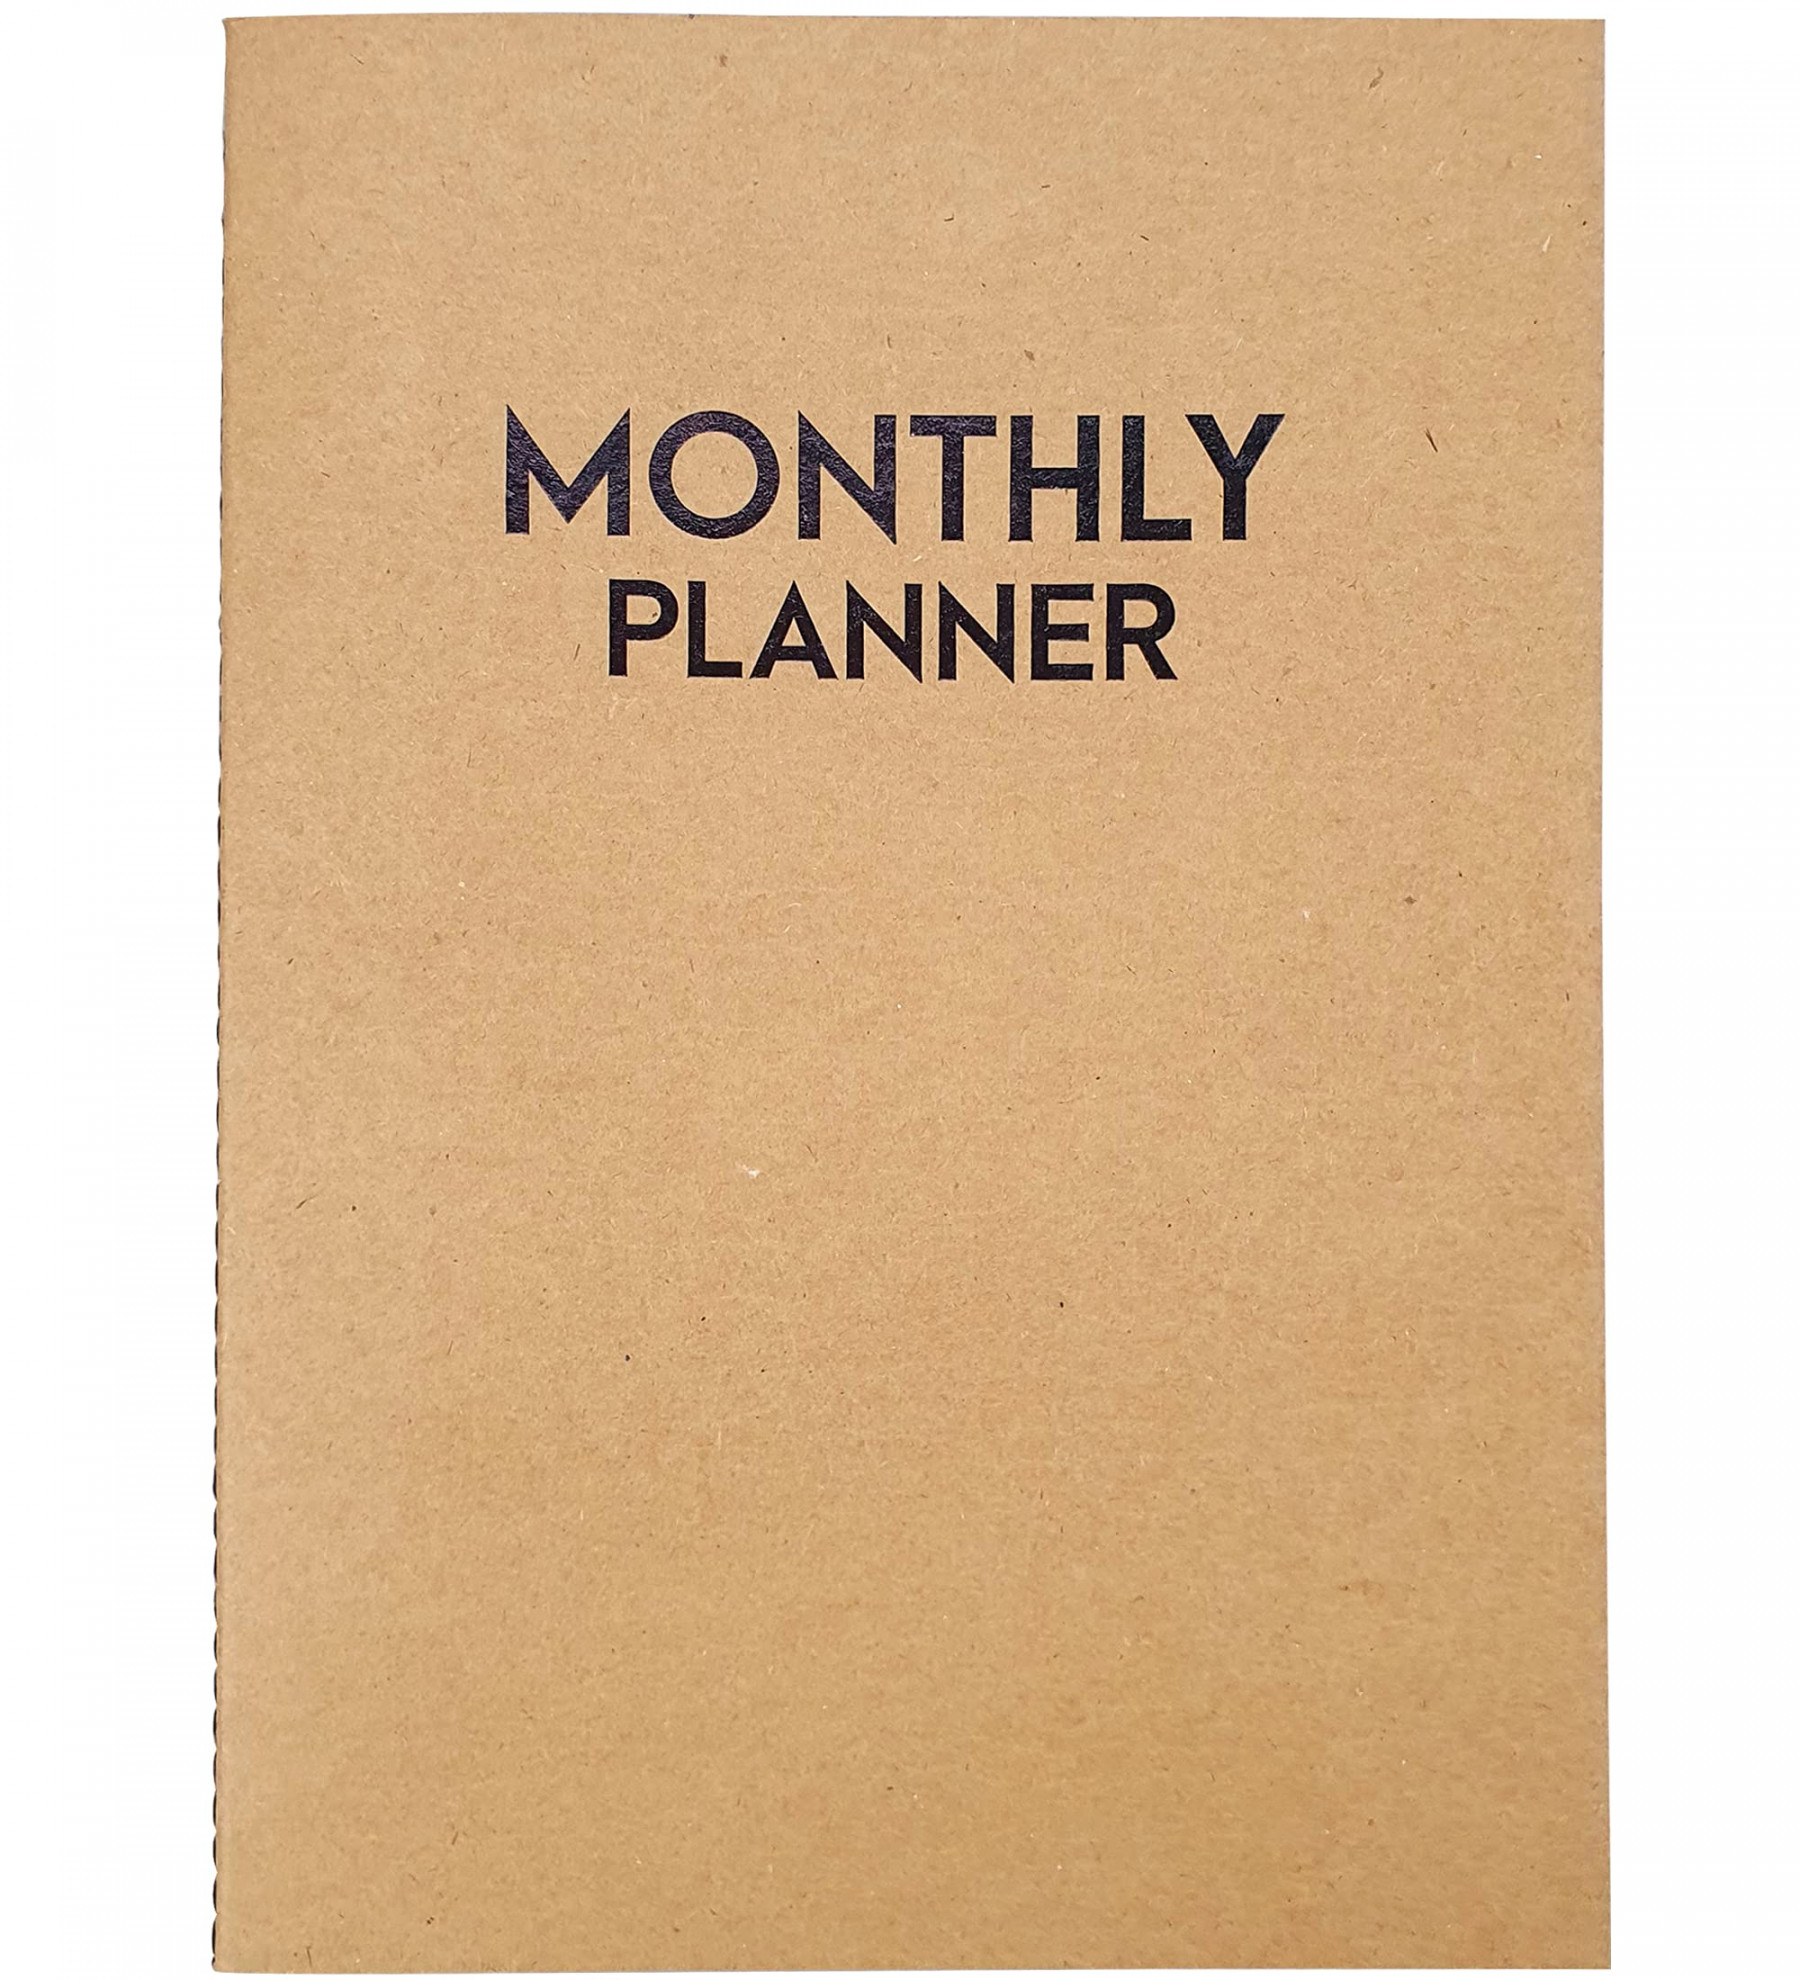 Undated Big Large Monthly Planner - - Blank Calendar Book and  Organizers